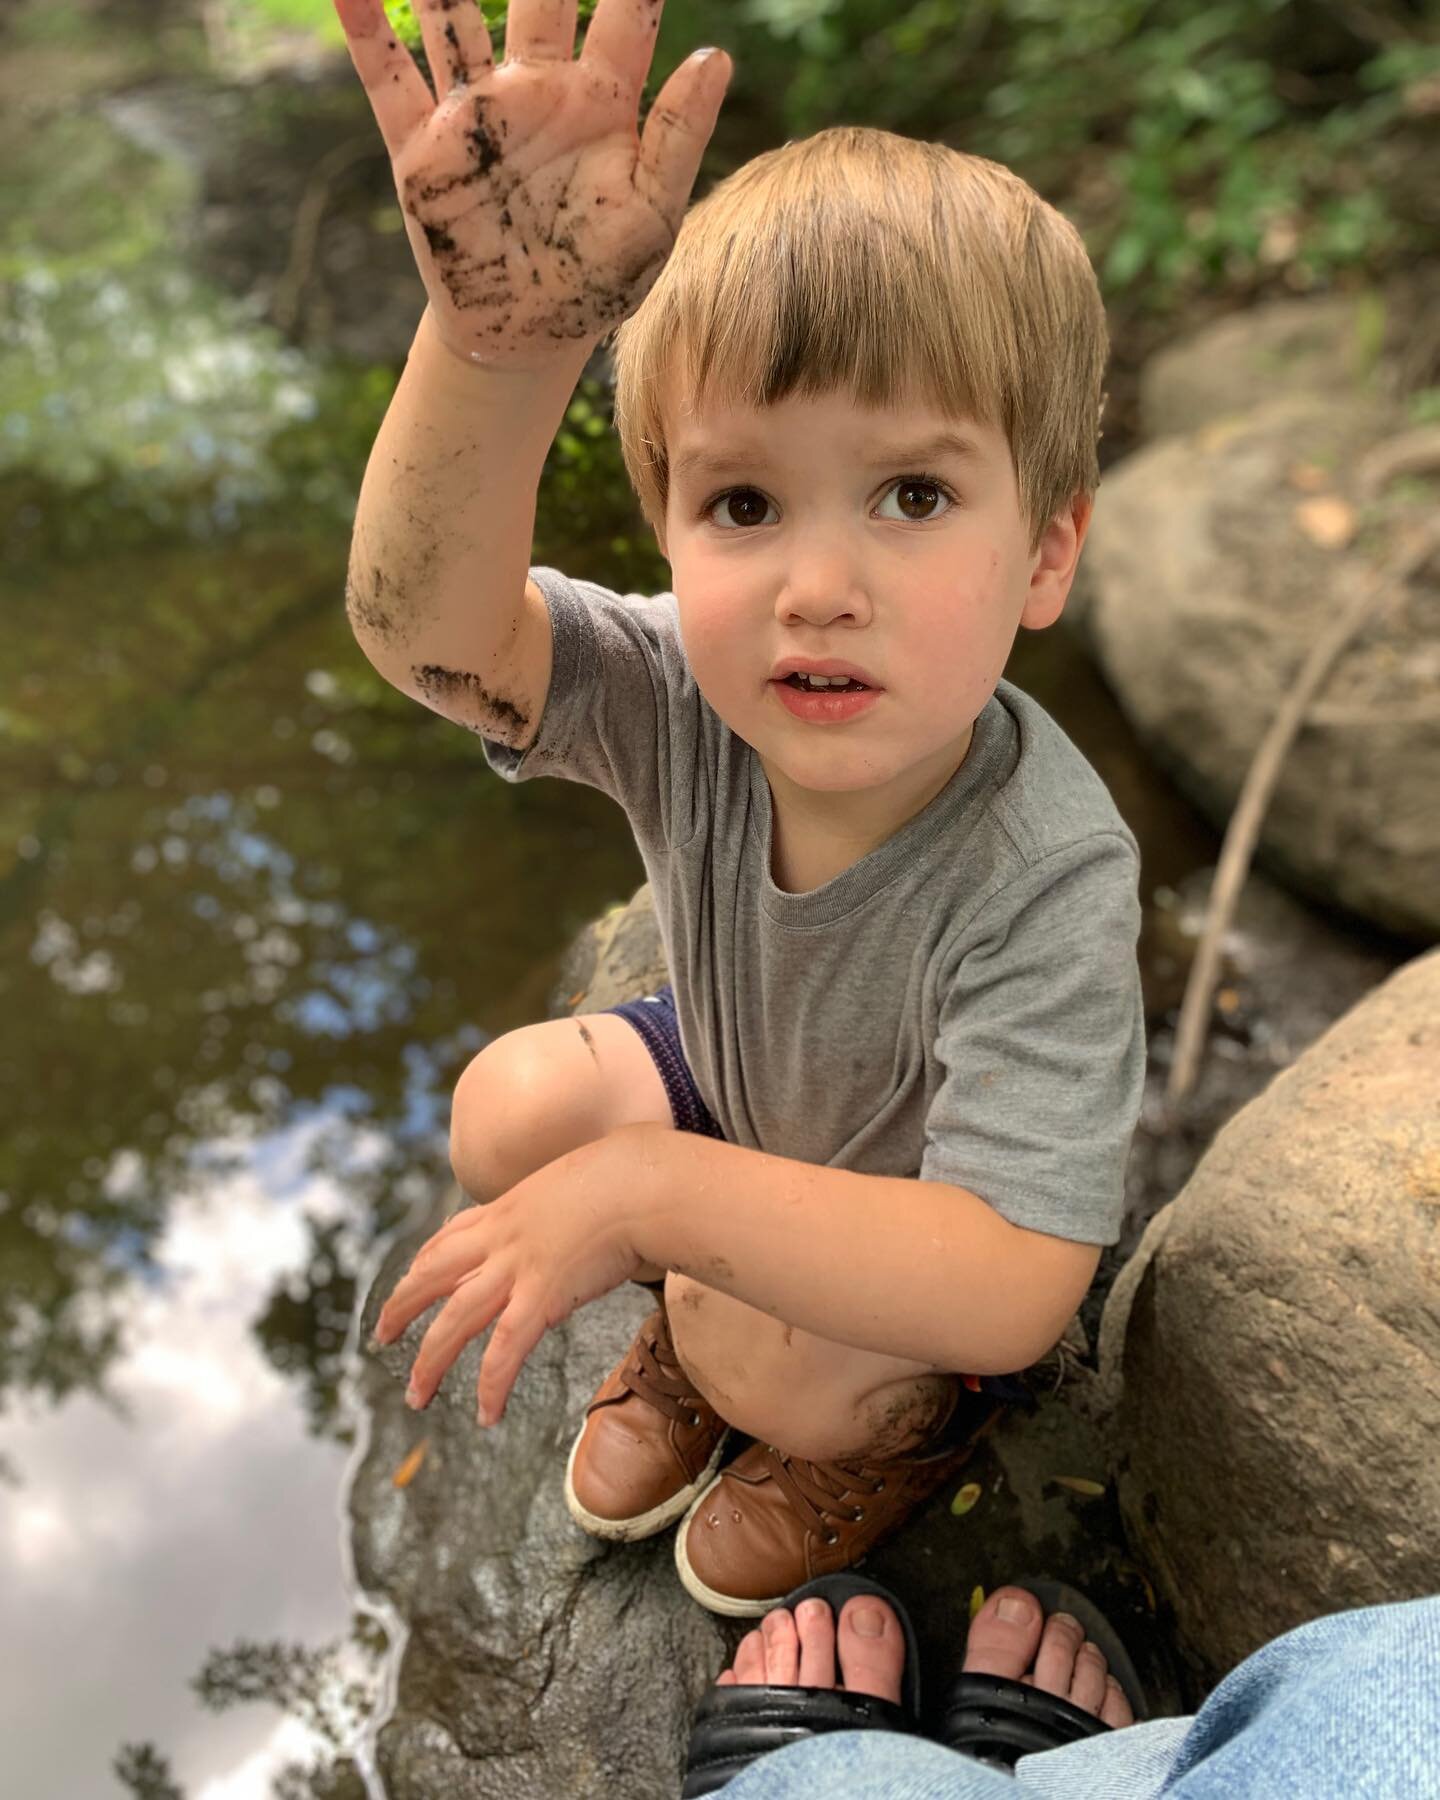 This is what work life balance looks like. @jostensinc we have Summer Fridays, so schedules permitting, I get to take Friday afternoons off. Today we spent it splashing in the creek, eating French fries and playing with sticks. Working to live, not l